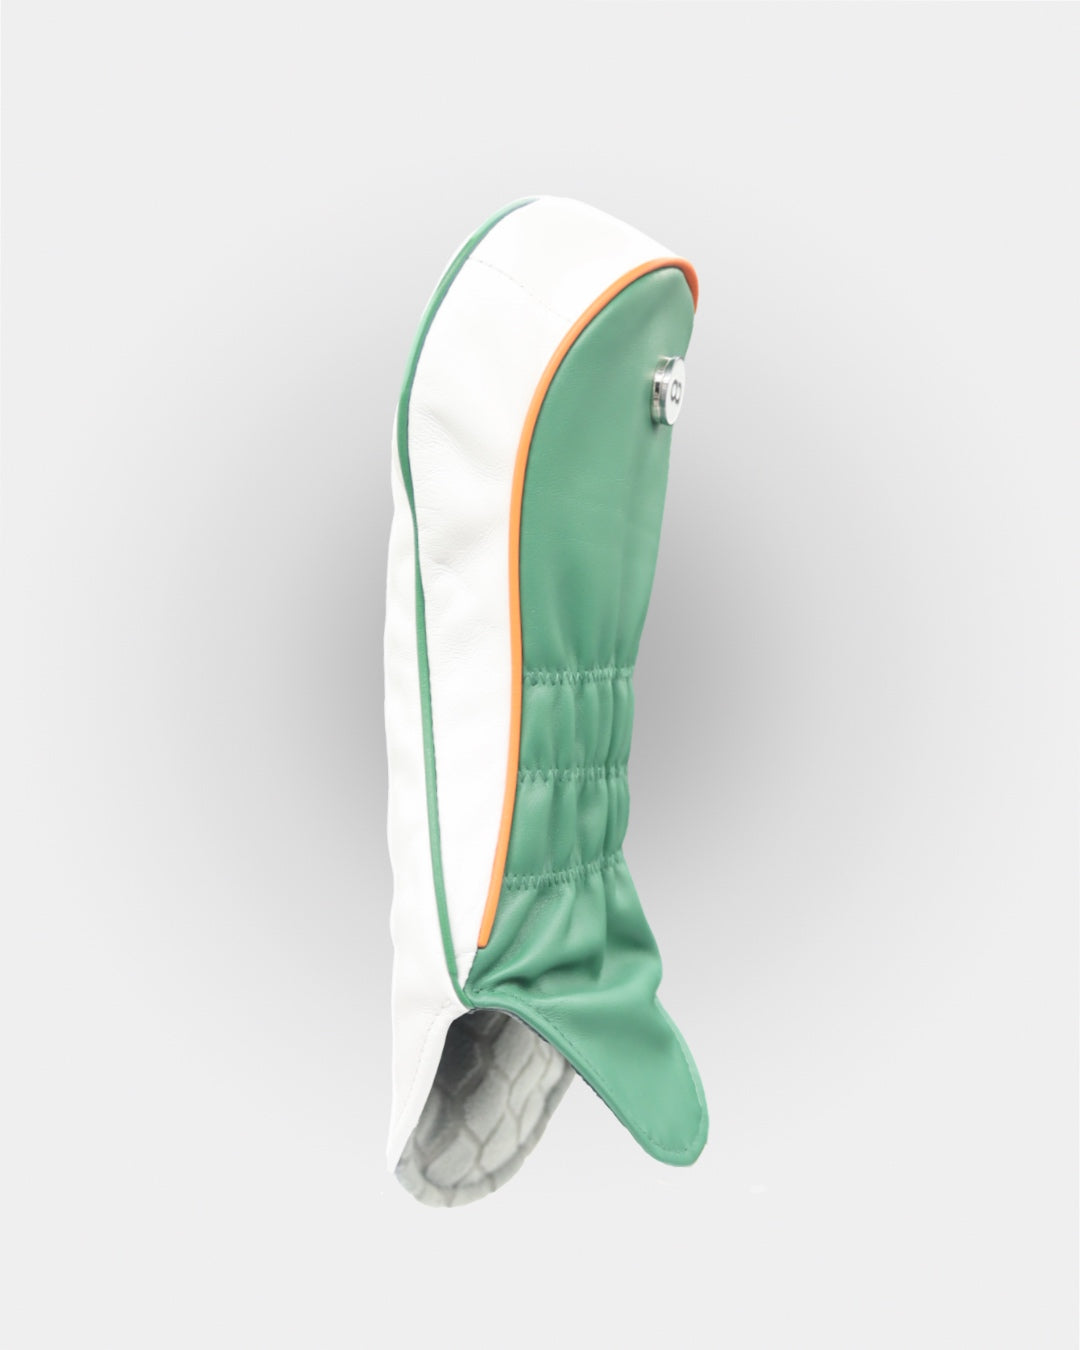 Ireland white and green leather fairway wood headcover by David Alexander. 